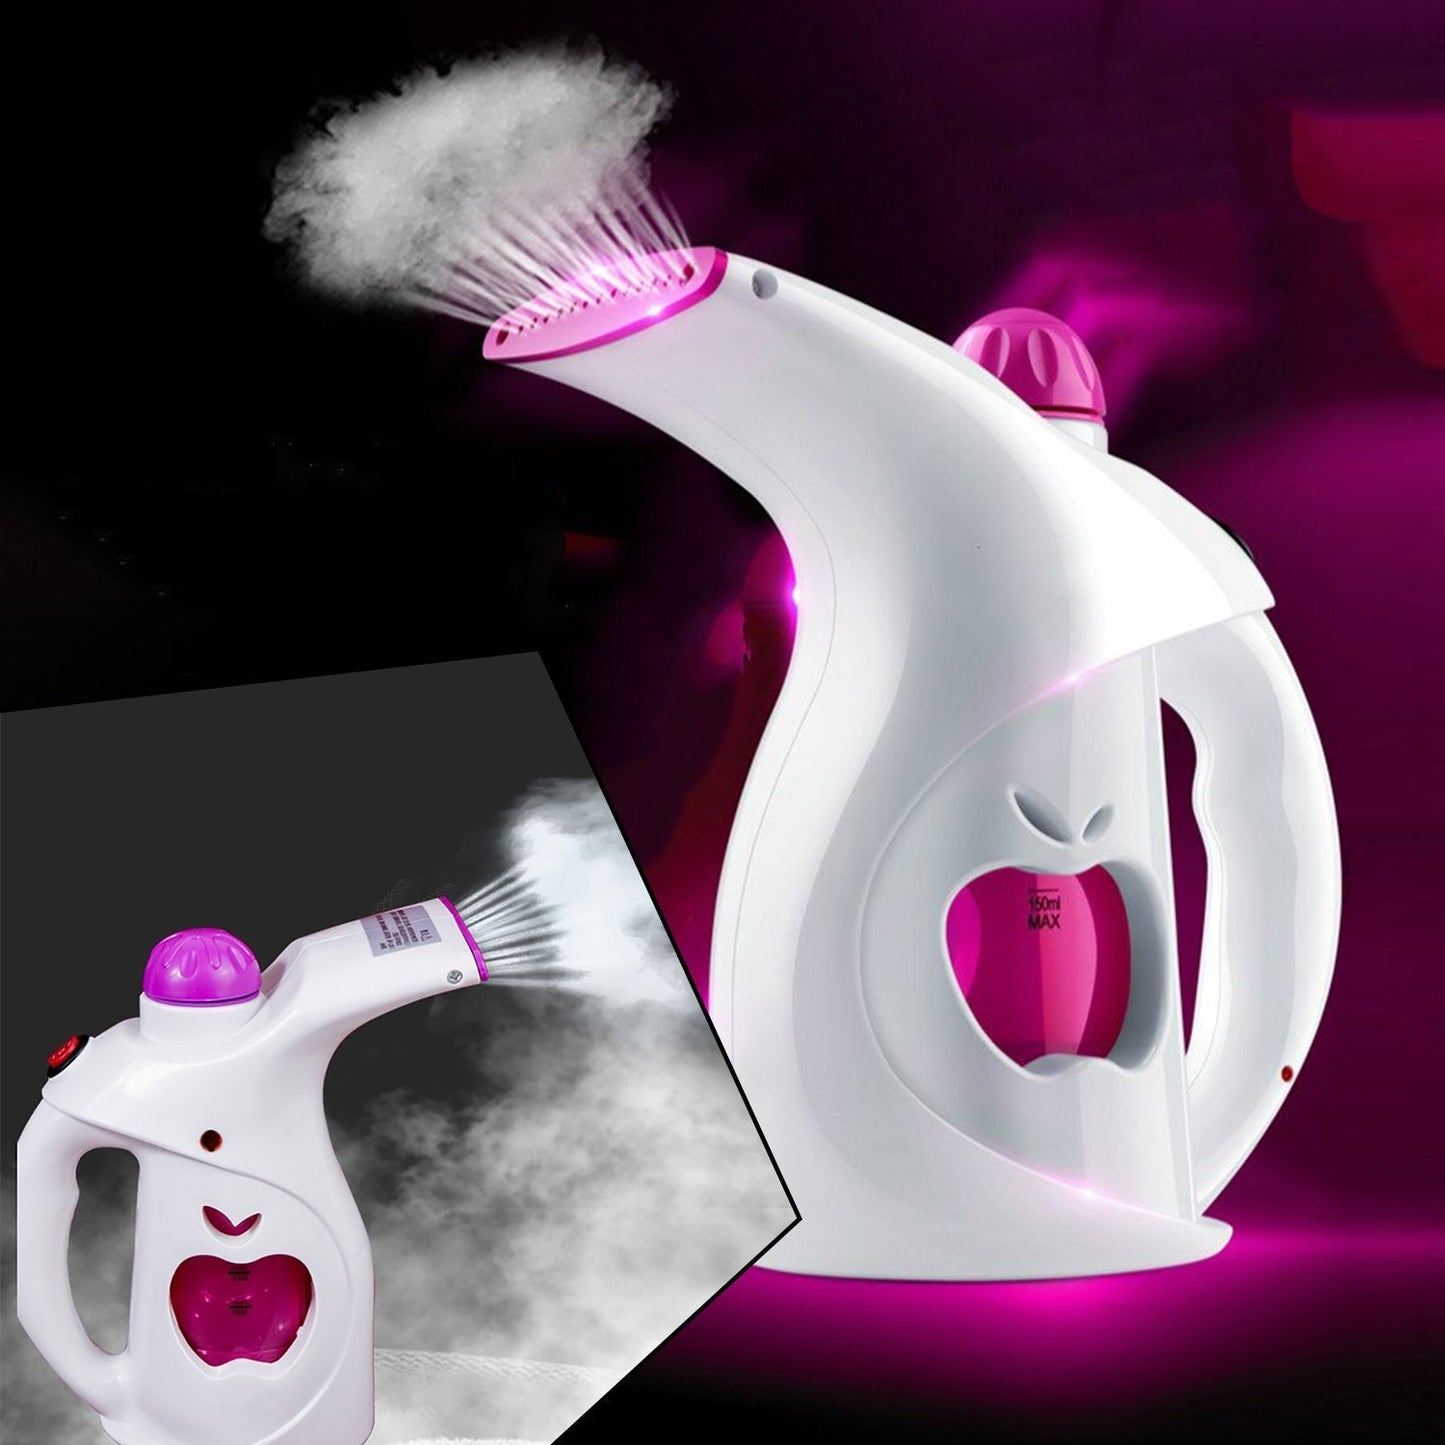 6107 Facial Steamer and facial vaporizer Used for taking steam and vapour. 